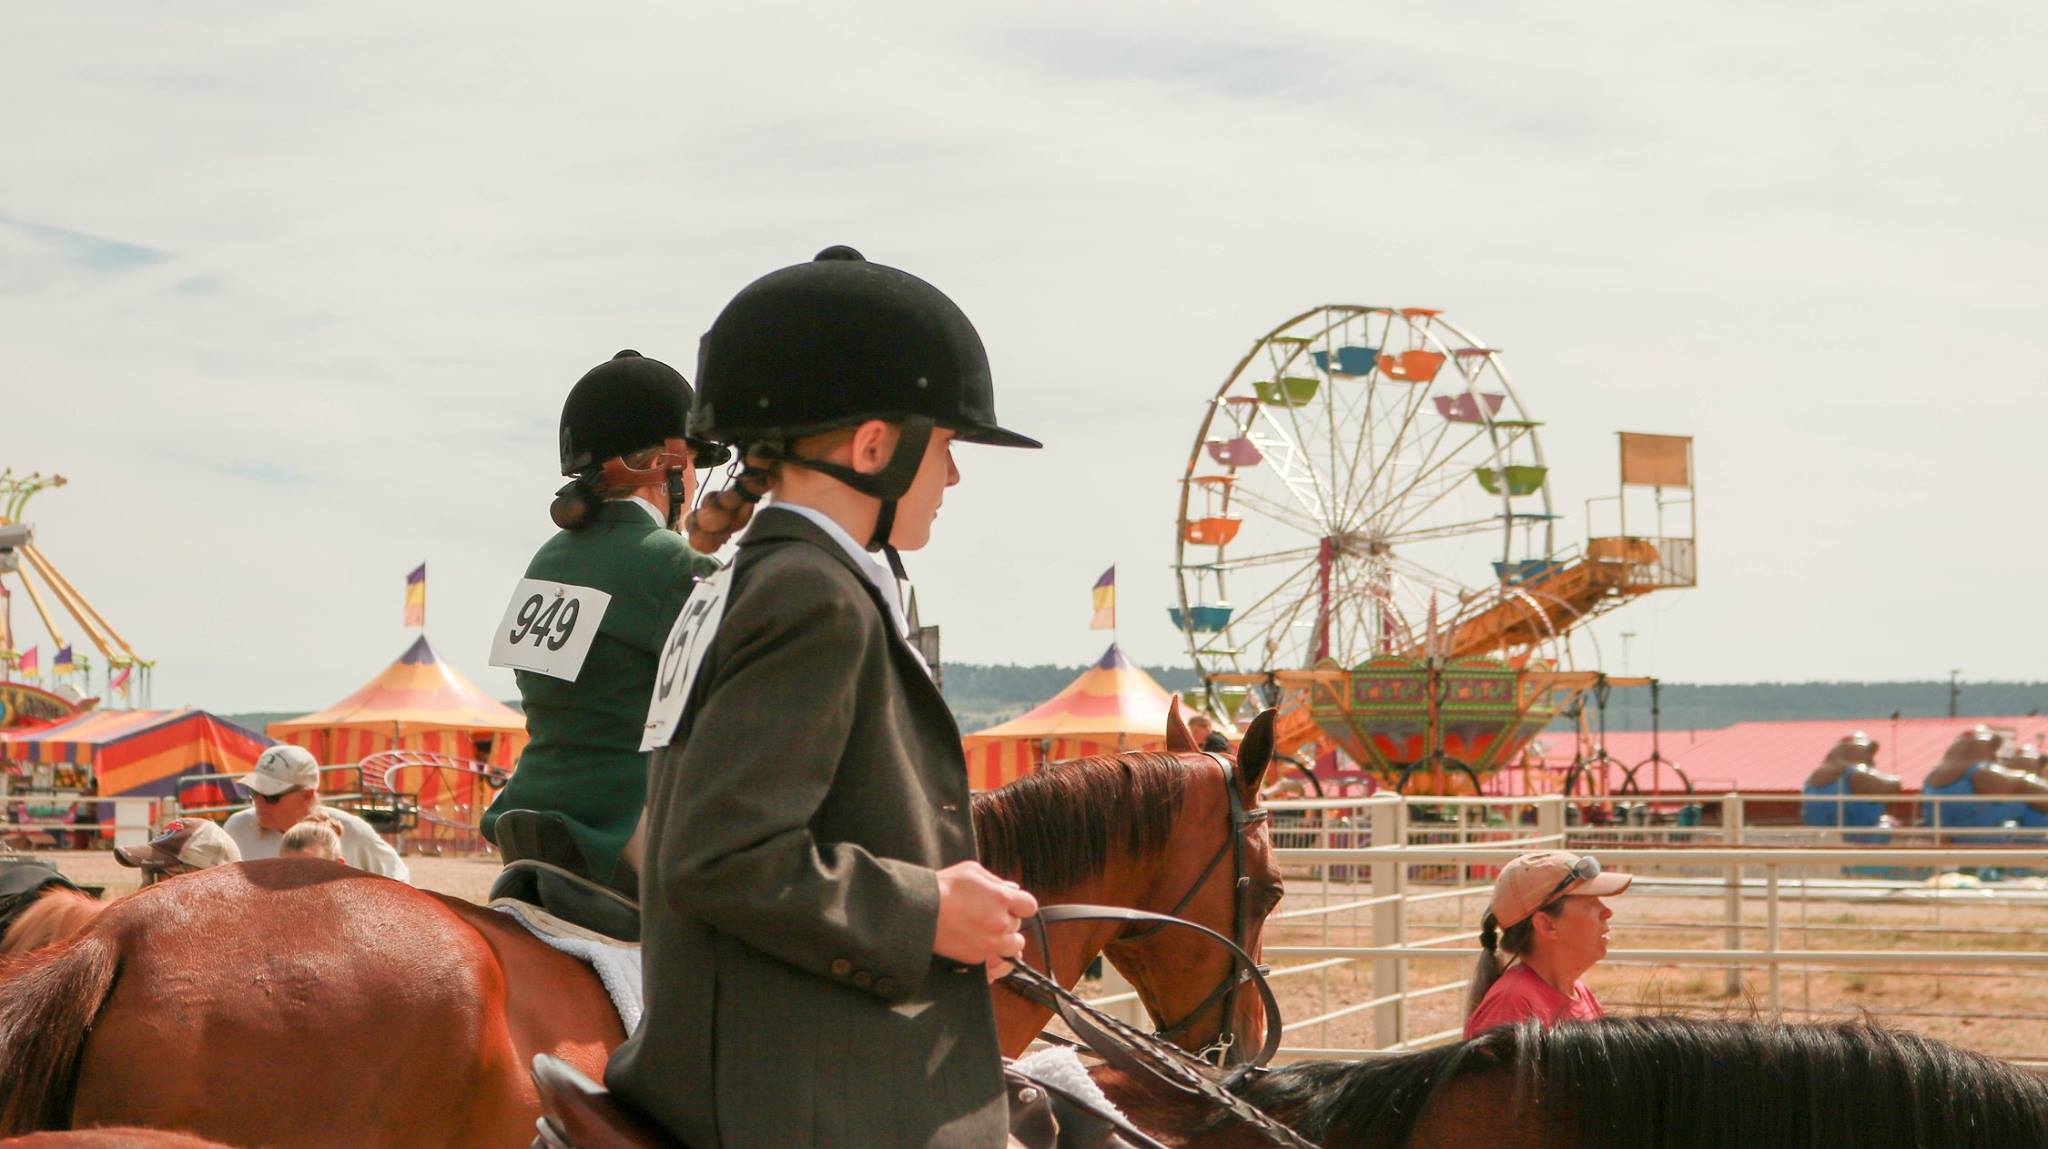 Two young girls on horses with fairgrounds in the background